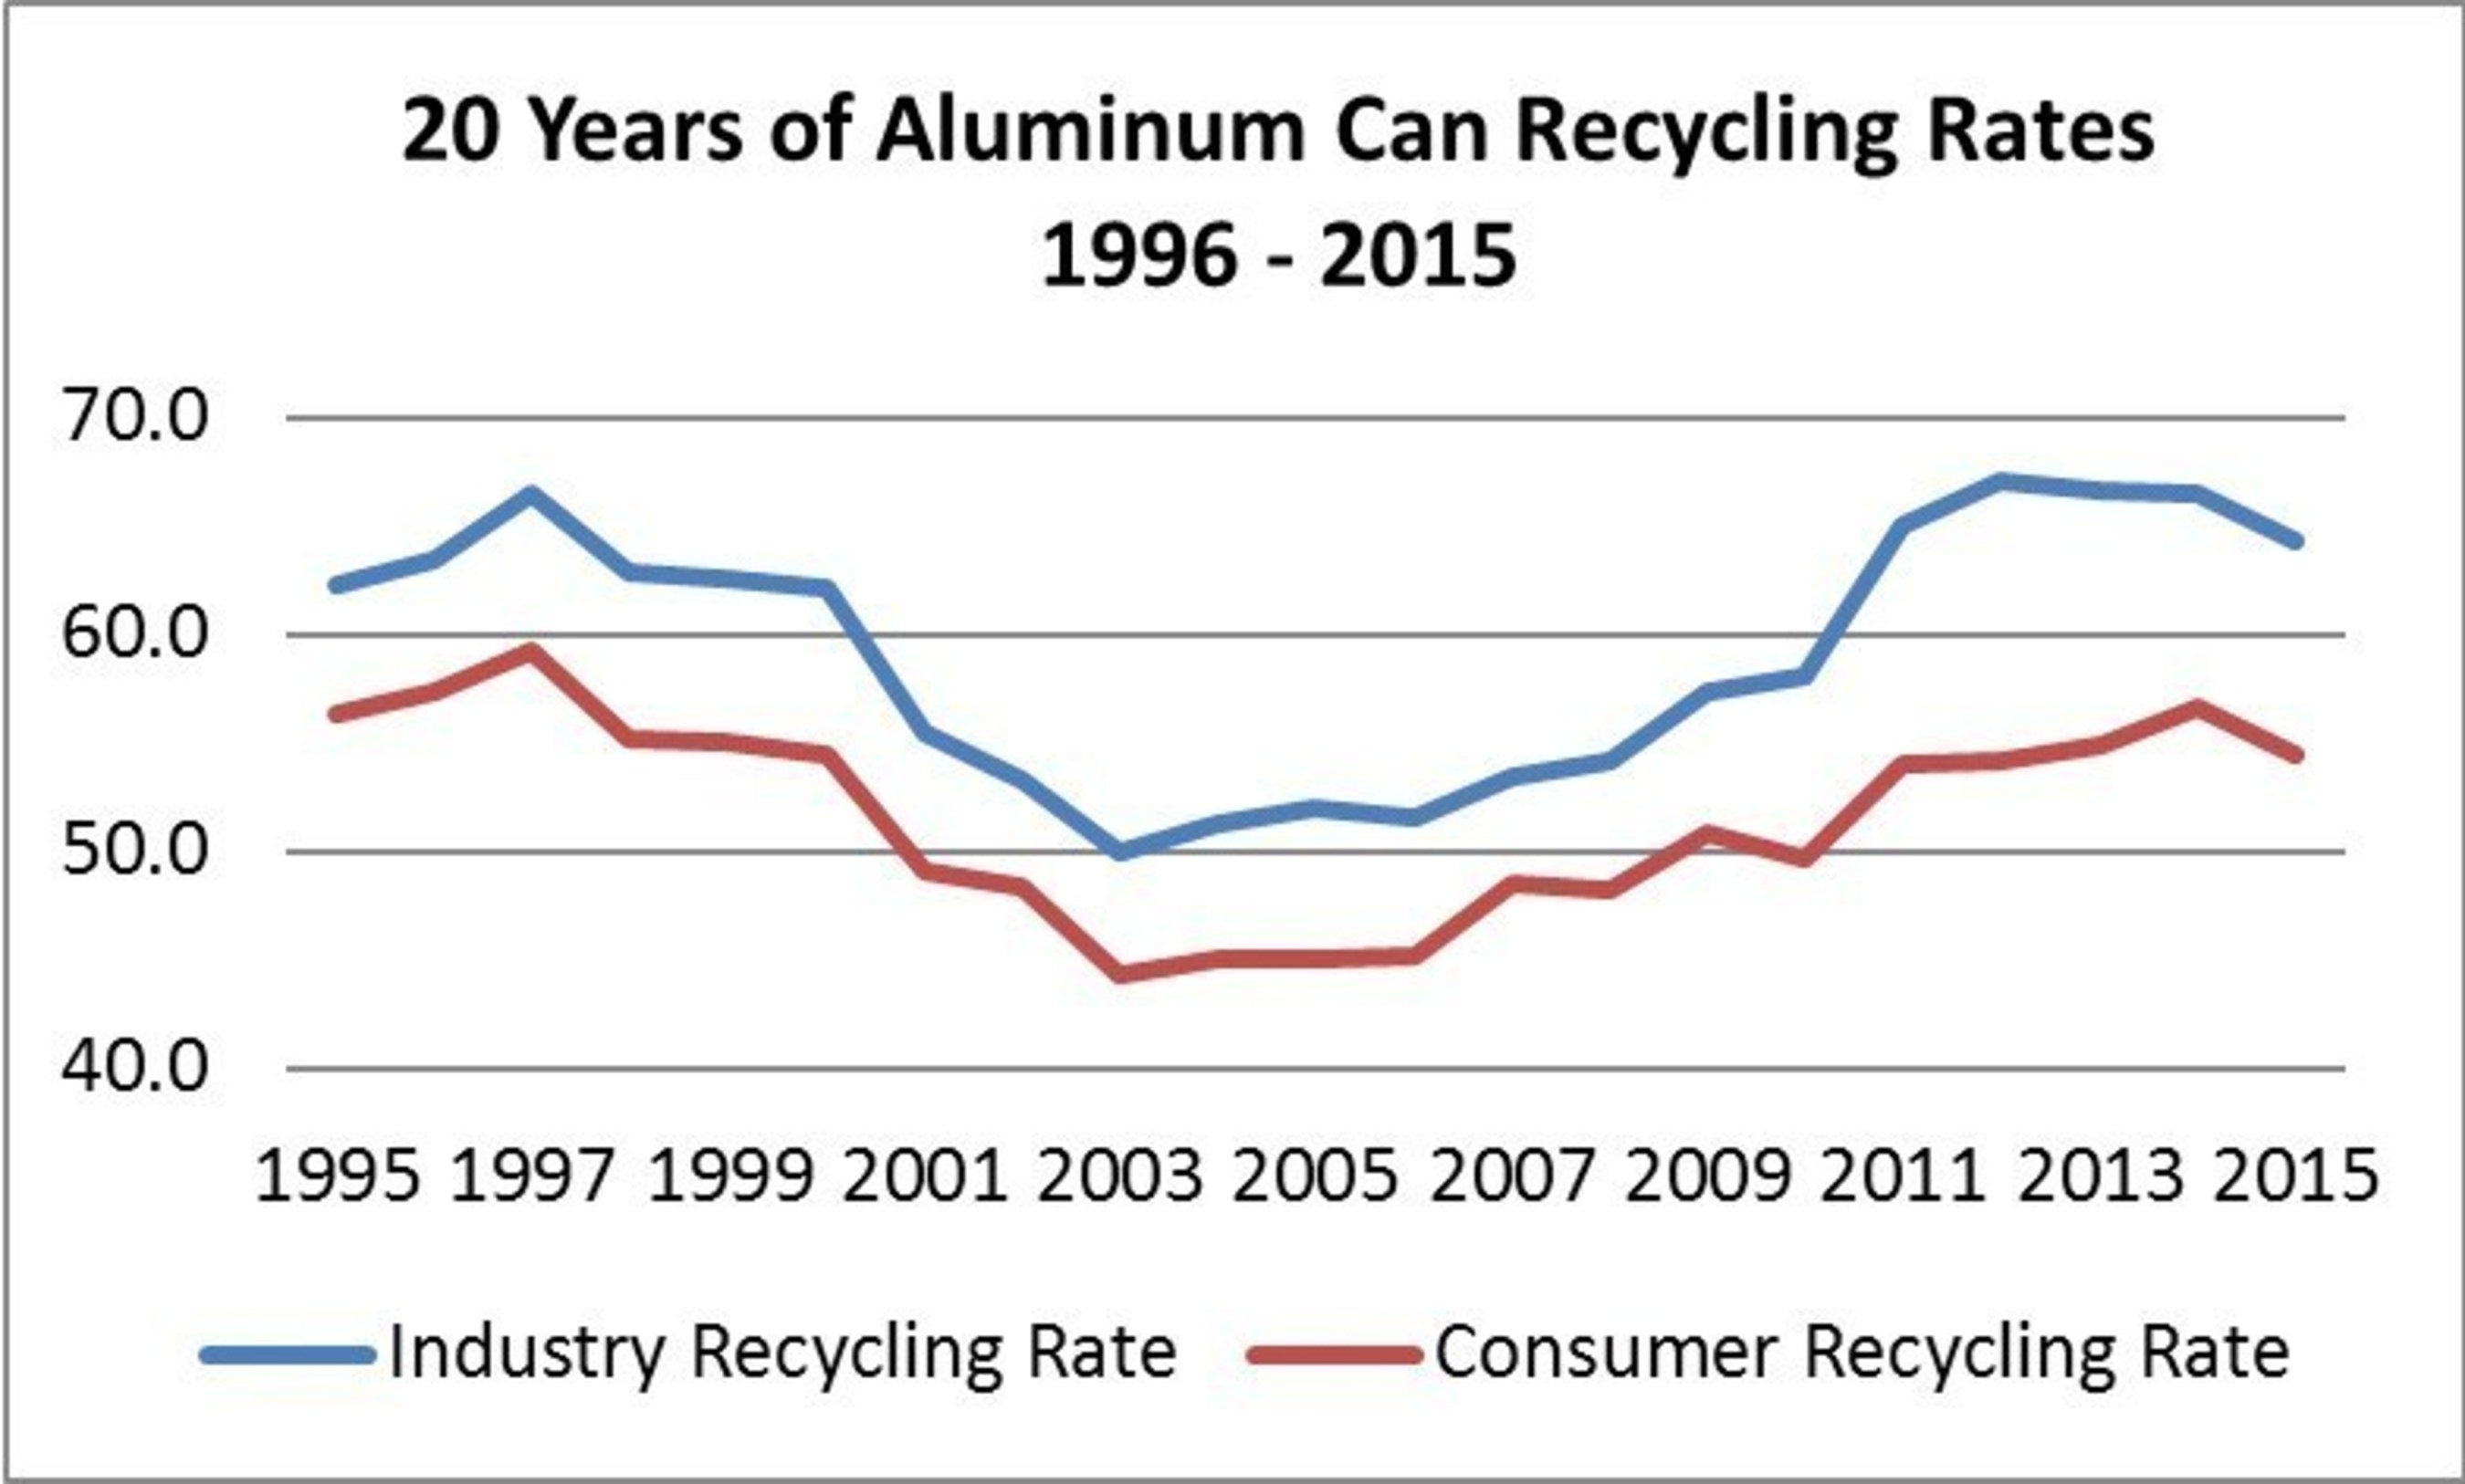 Since lows reported in the early 2000s, both the industry and consumer recycling rate for the aluminum beverage can have risen around 10 to 15 points and held near these levels for the past five years.